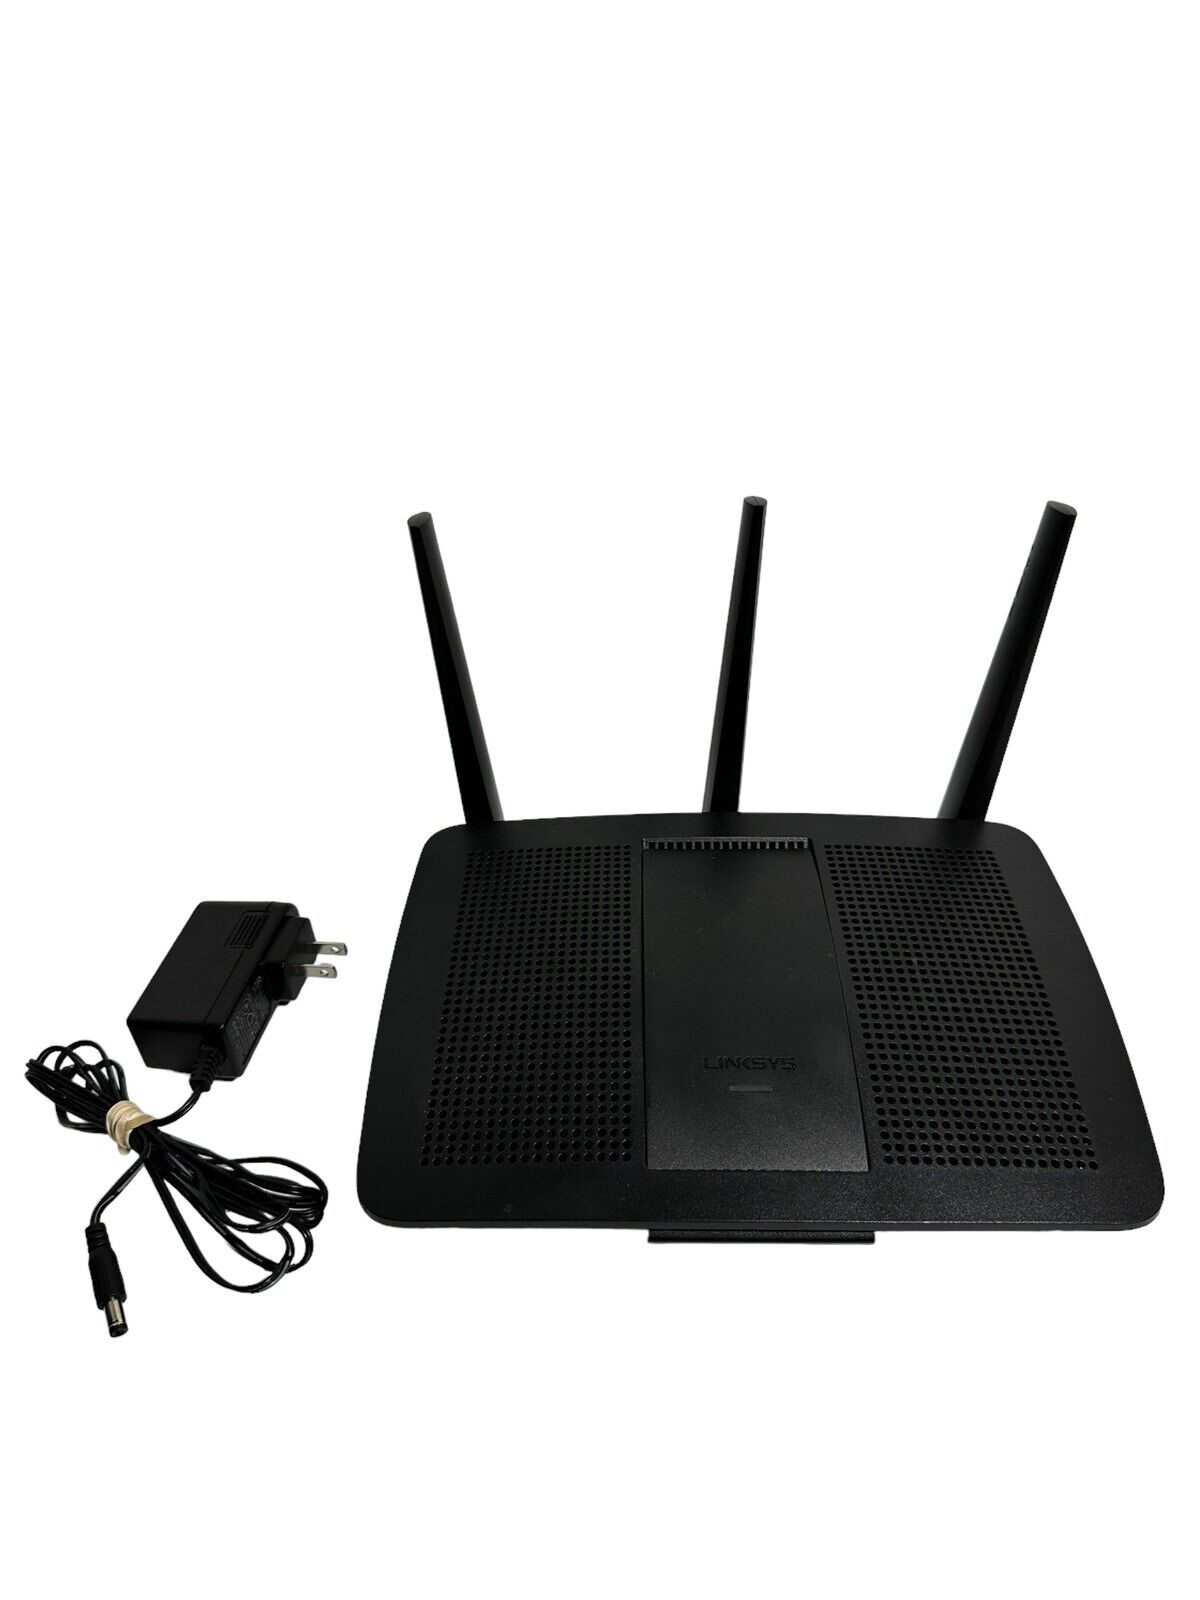 Linksys EA7200 Max-Stream Dual-Band AC1750 Wi-Fi 5 Router Tested And Working